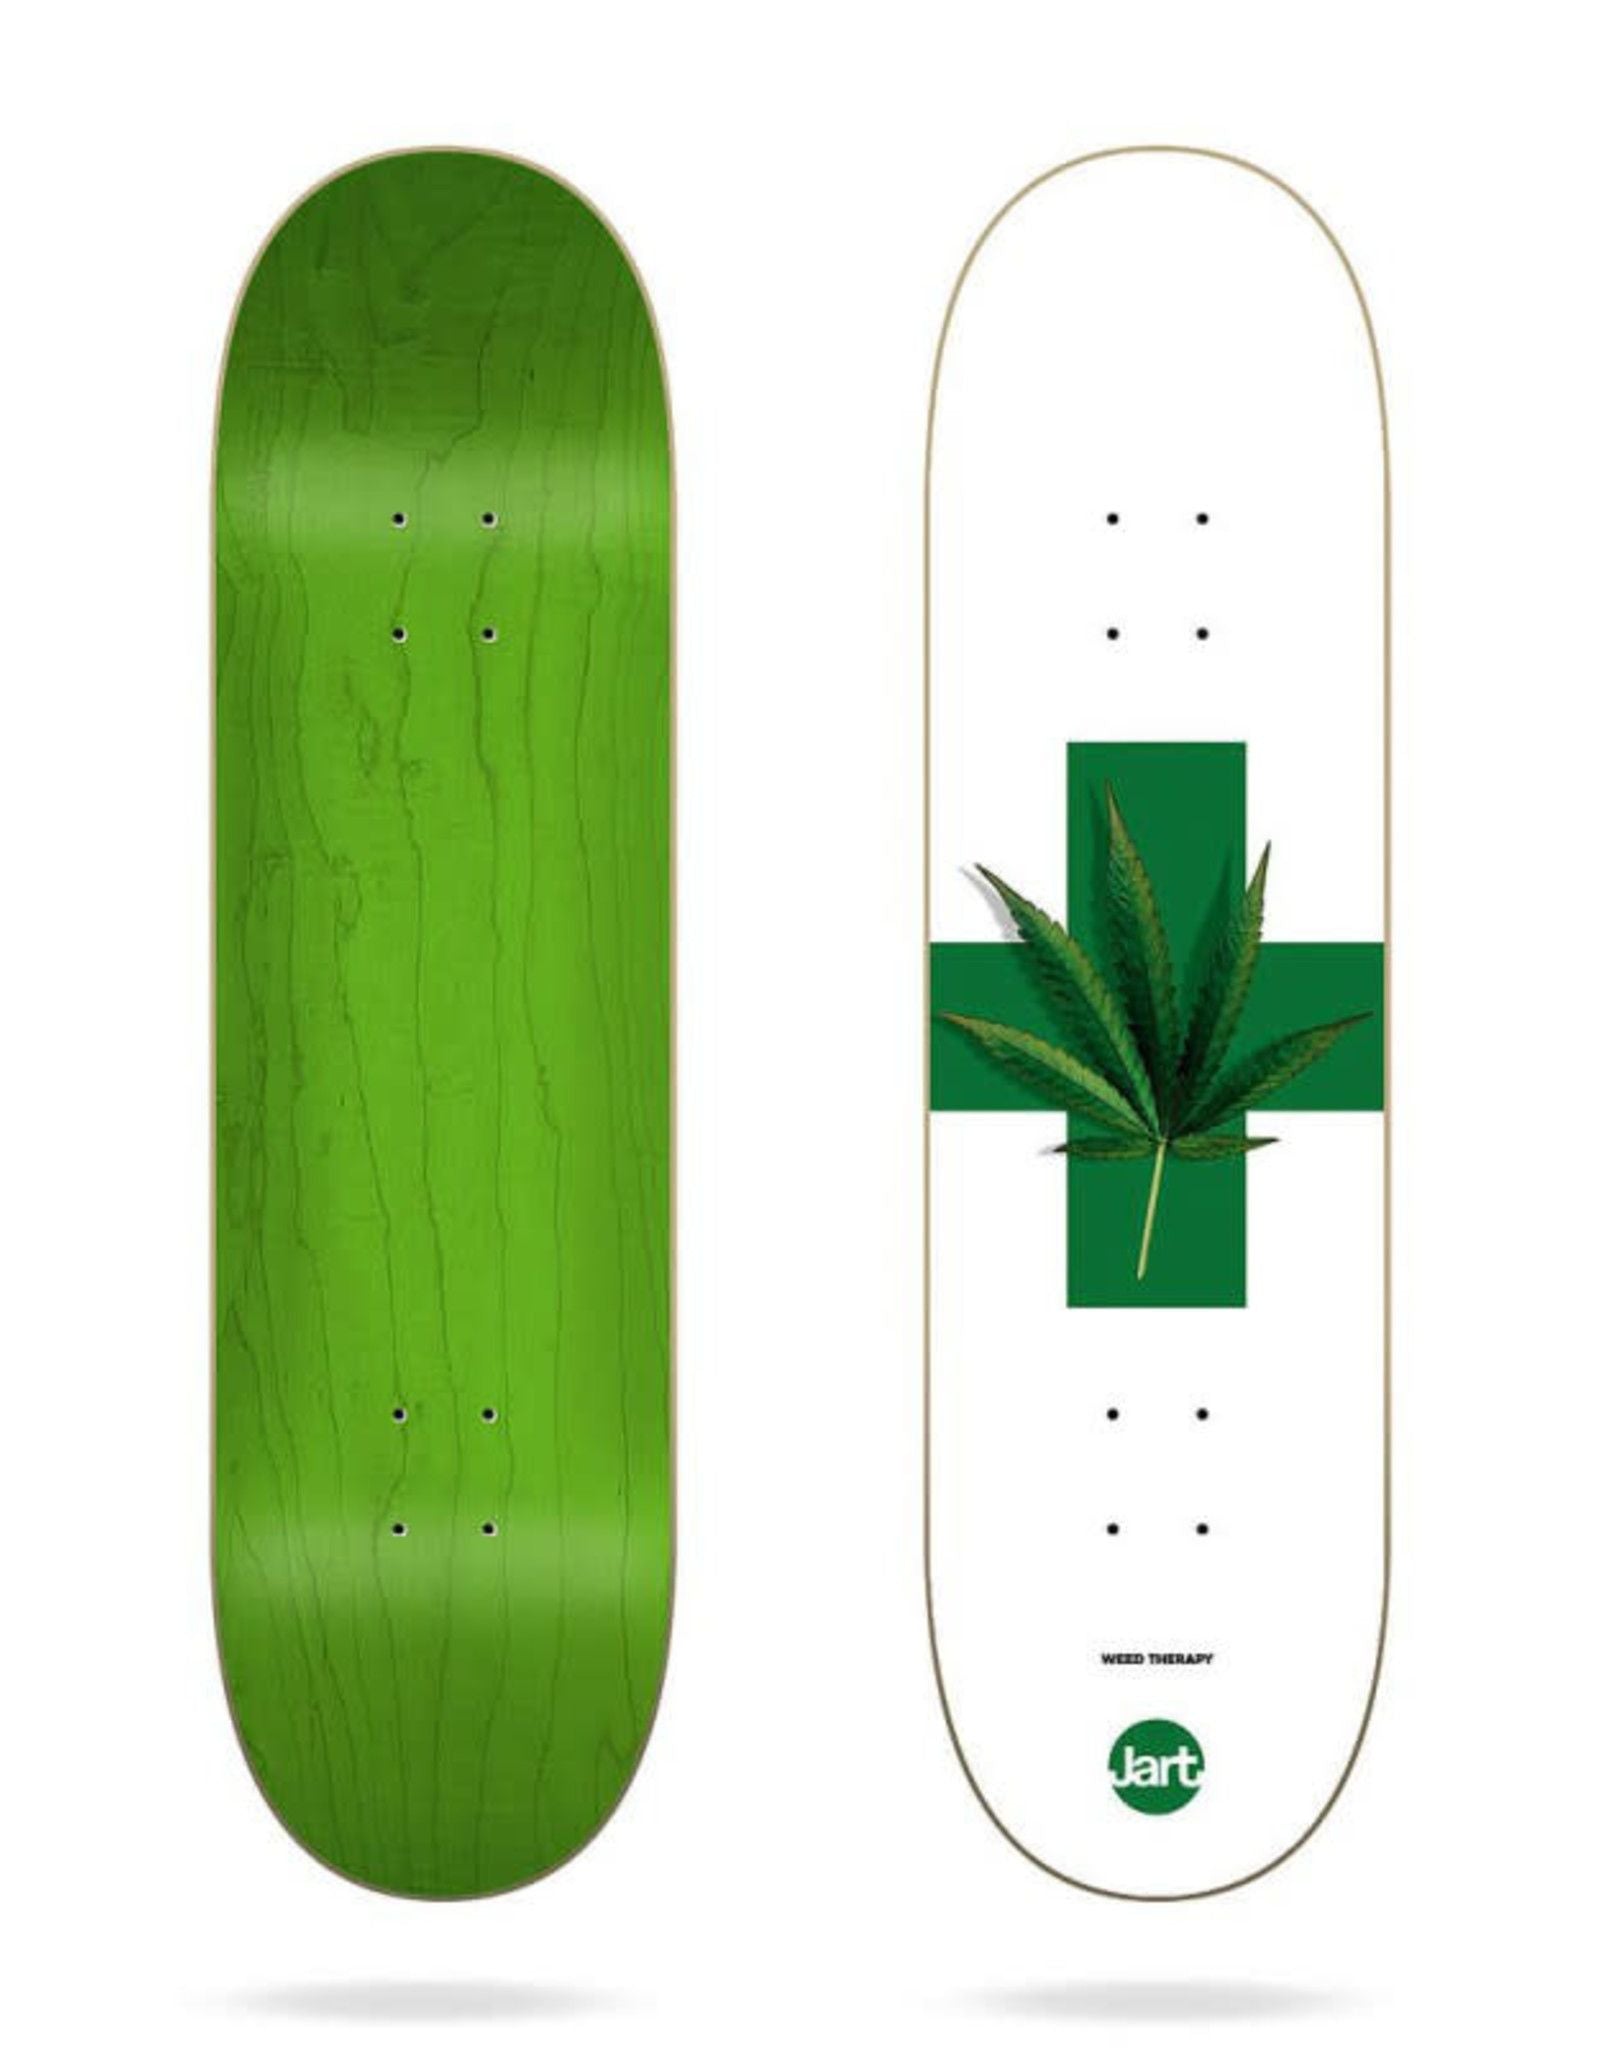 JART DECK WEED THERAPY (8")